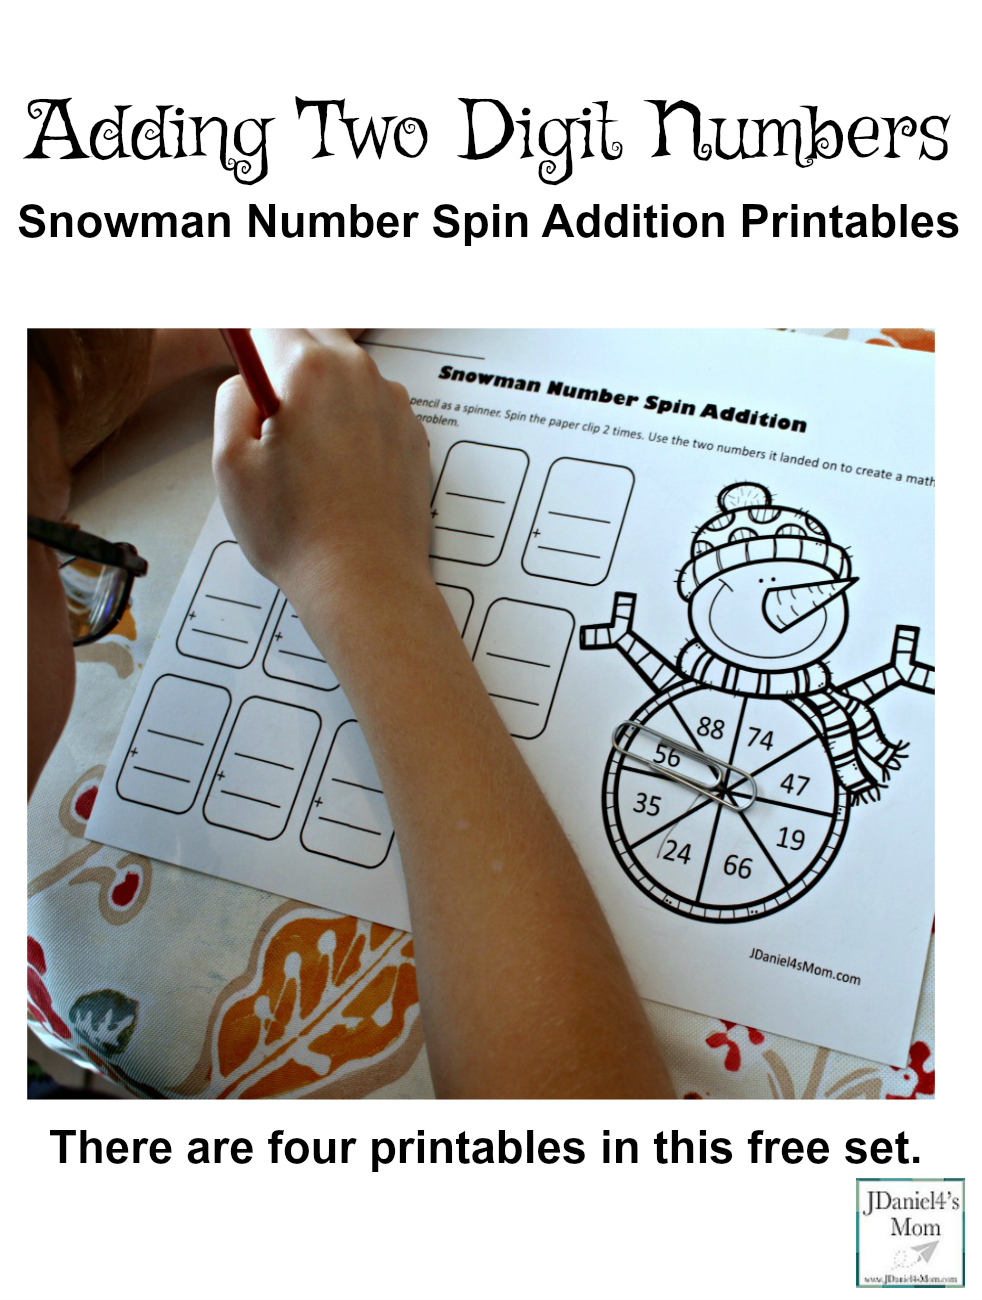 Adding Two Digit Numbers Snowman Number Spin Addition- Children at home and students at school will have fun using a spinner on the printable to create their own number facts. (This is a free printable set.)